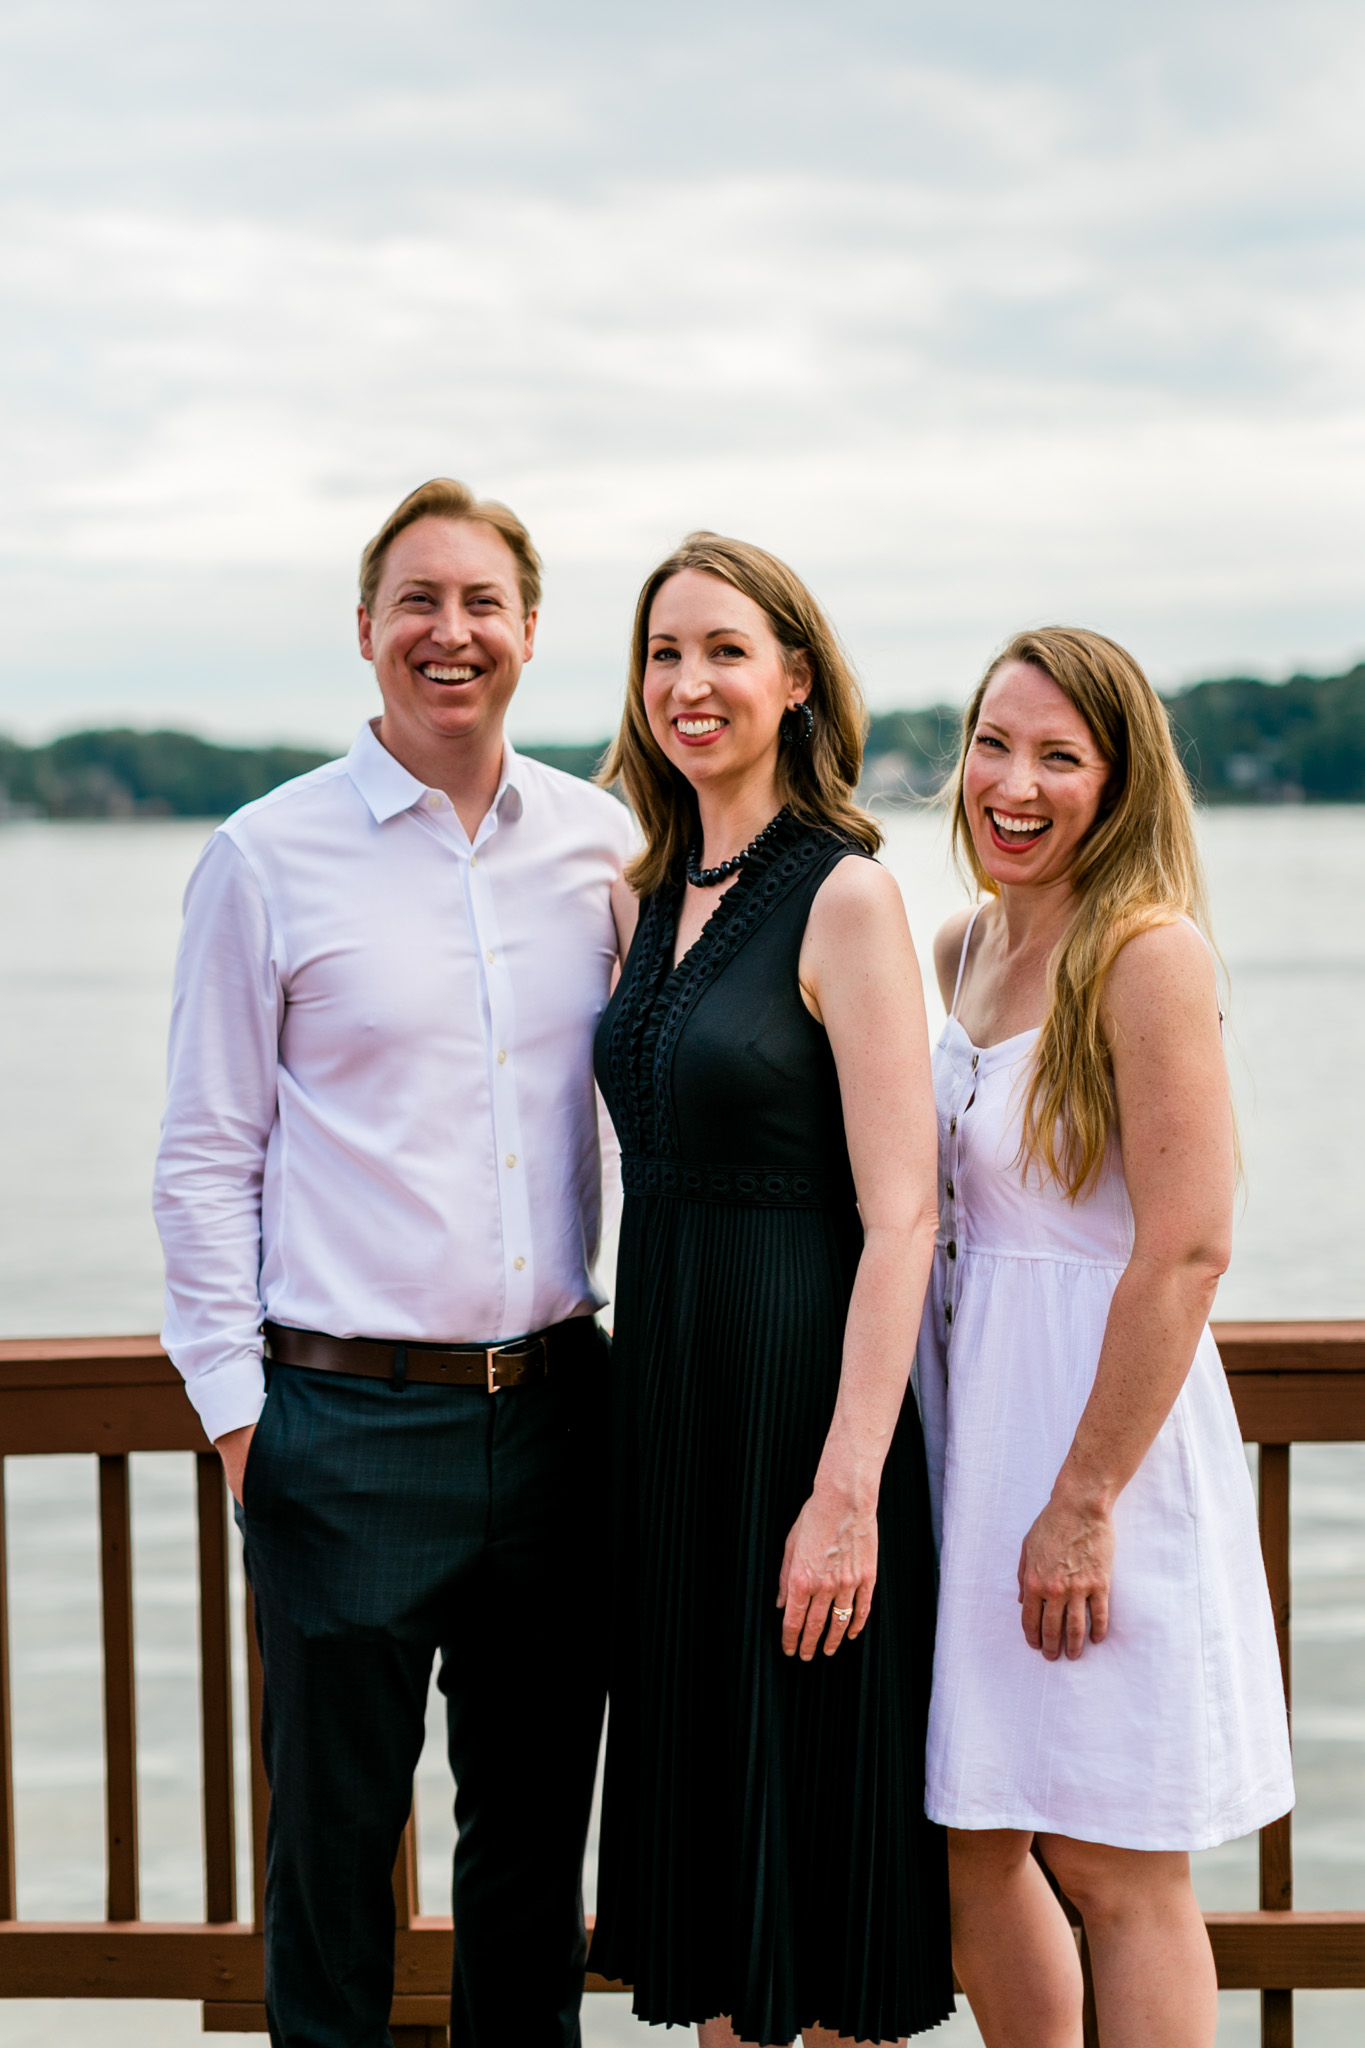 Sibling portrait of brother and two sisters | Raleigh Family Photographer | By G. Lin Photography